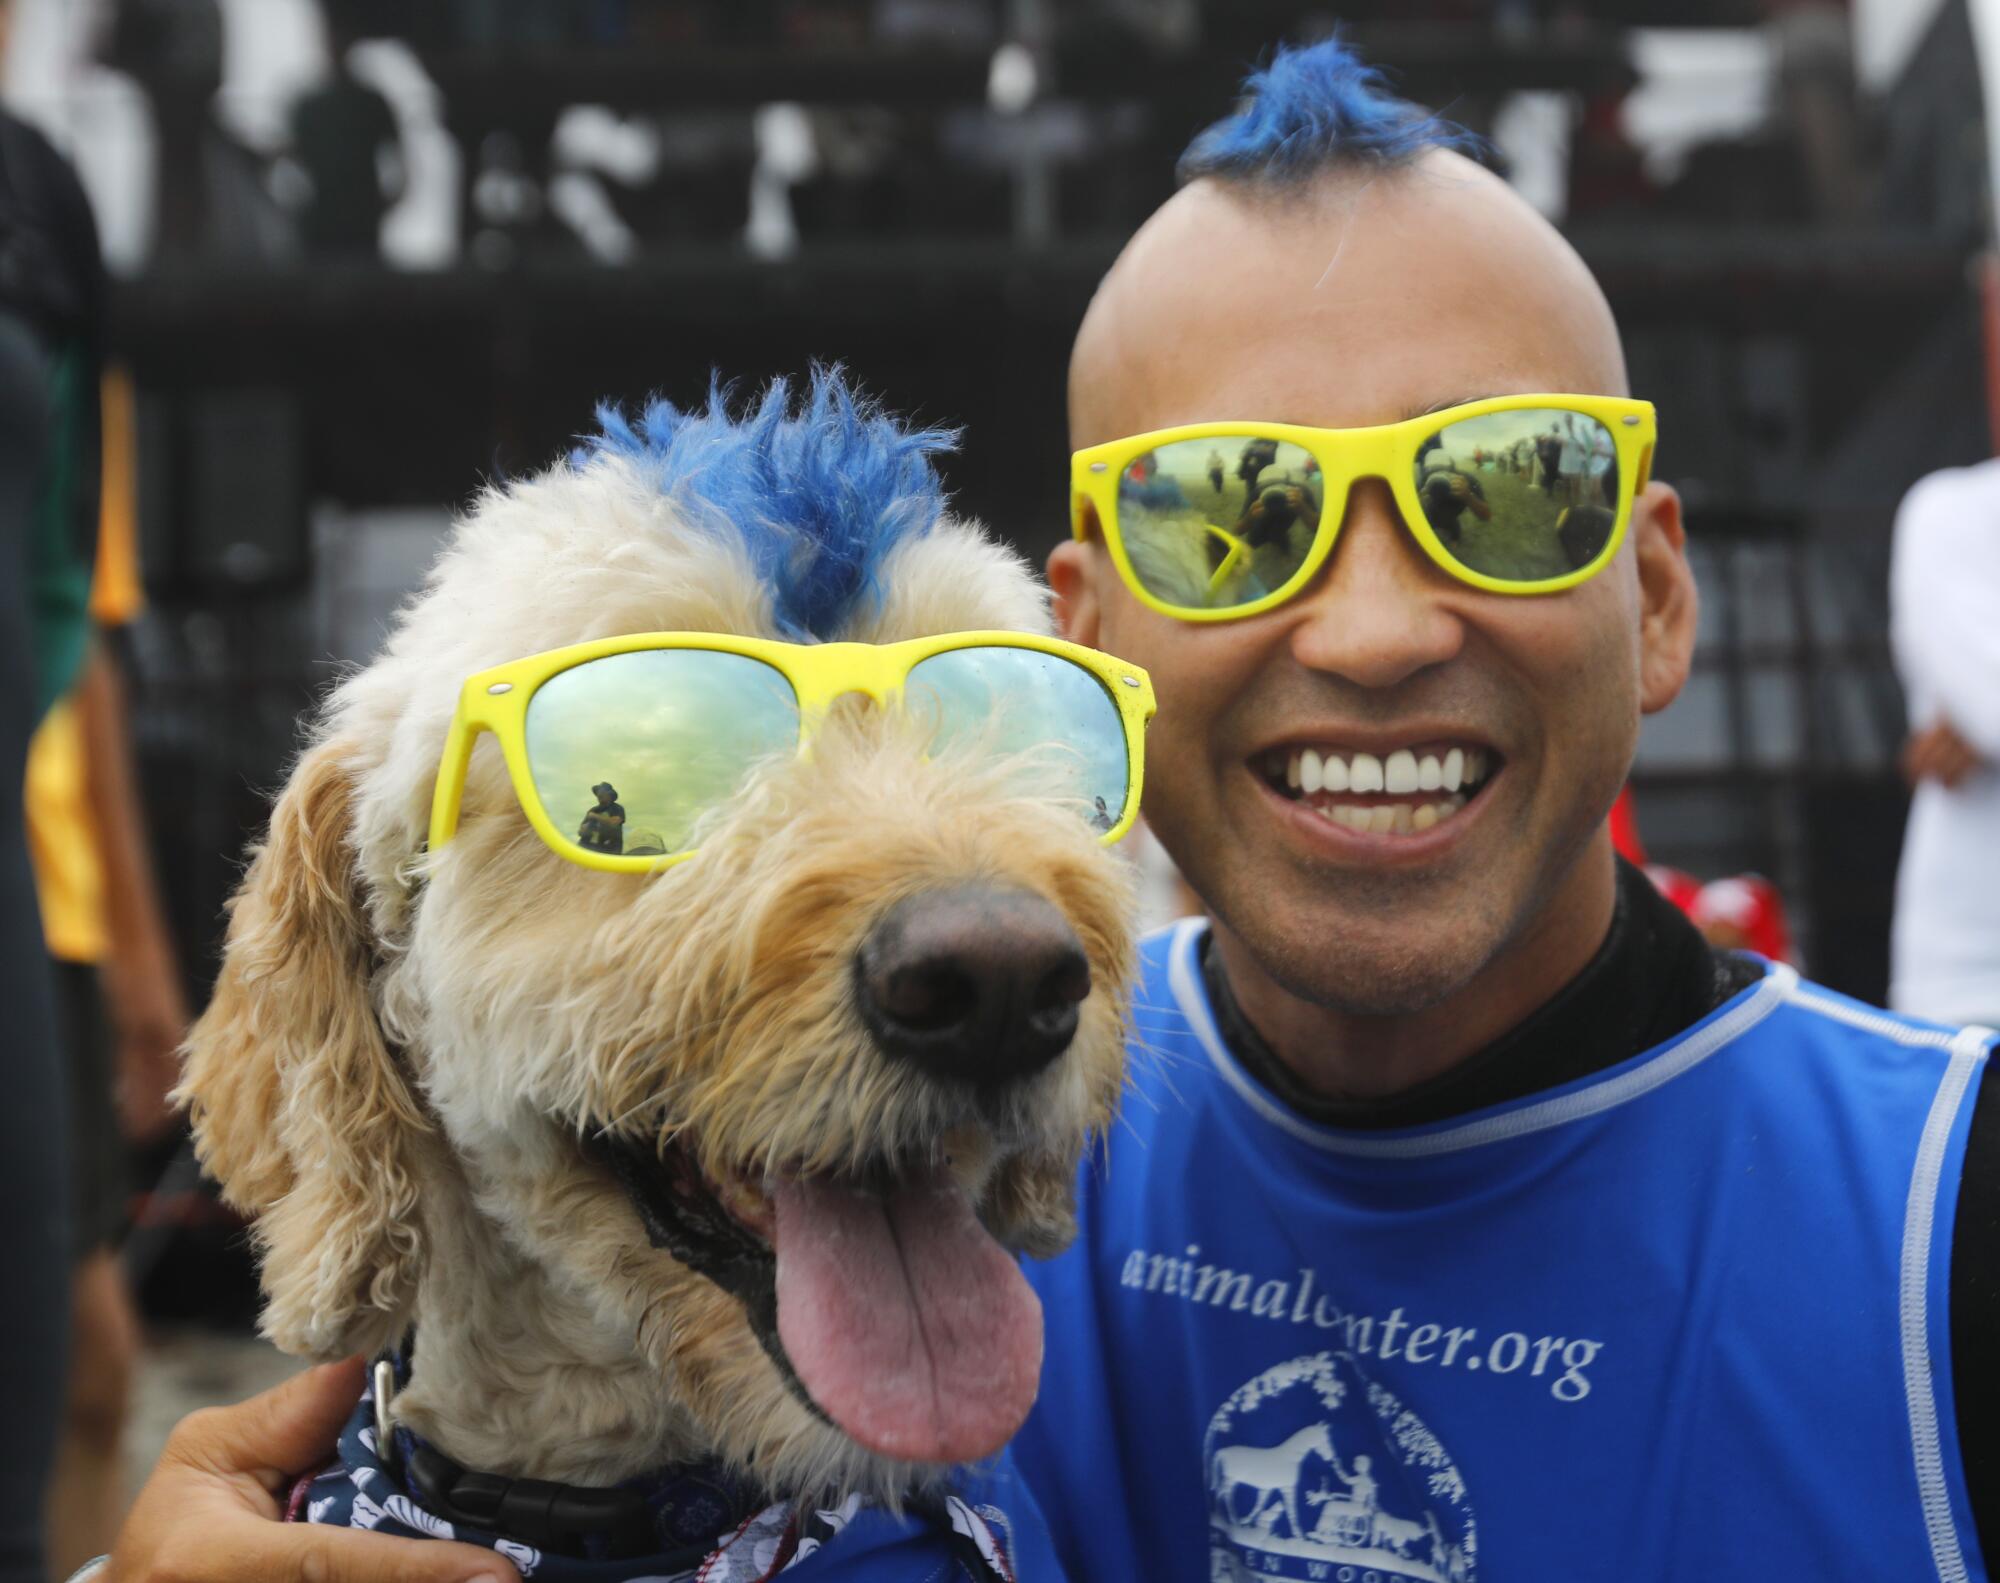 Kentucky Gallahue and his dog Derby sport matching mohawks and glasses before surfing.